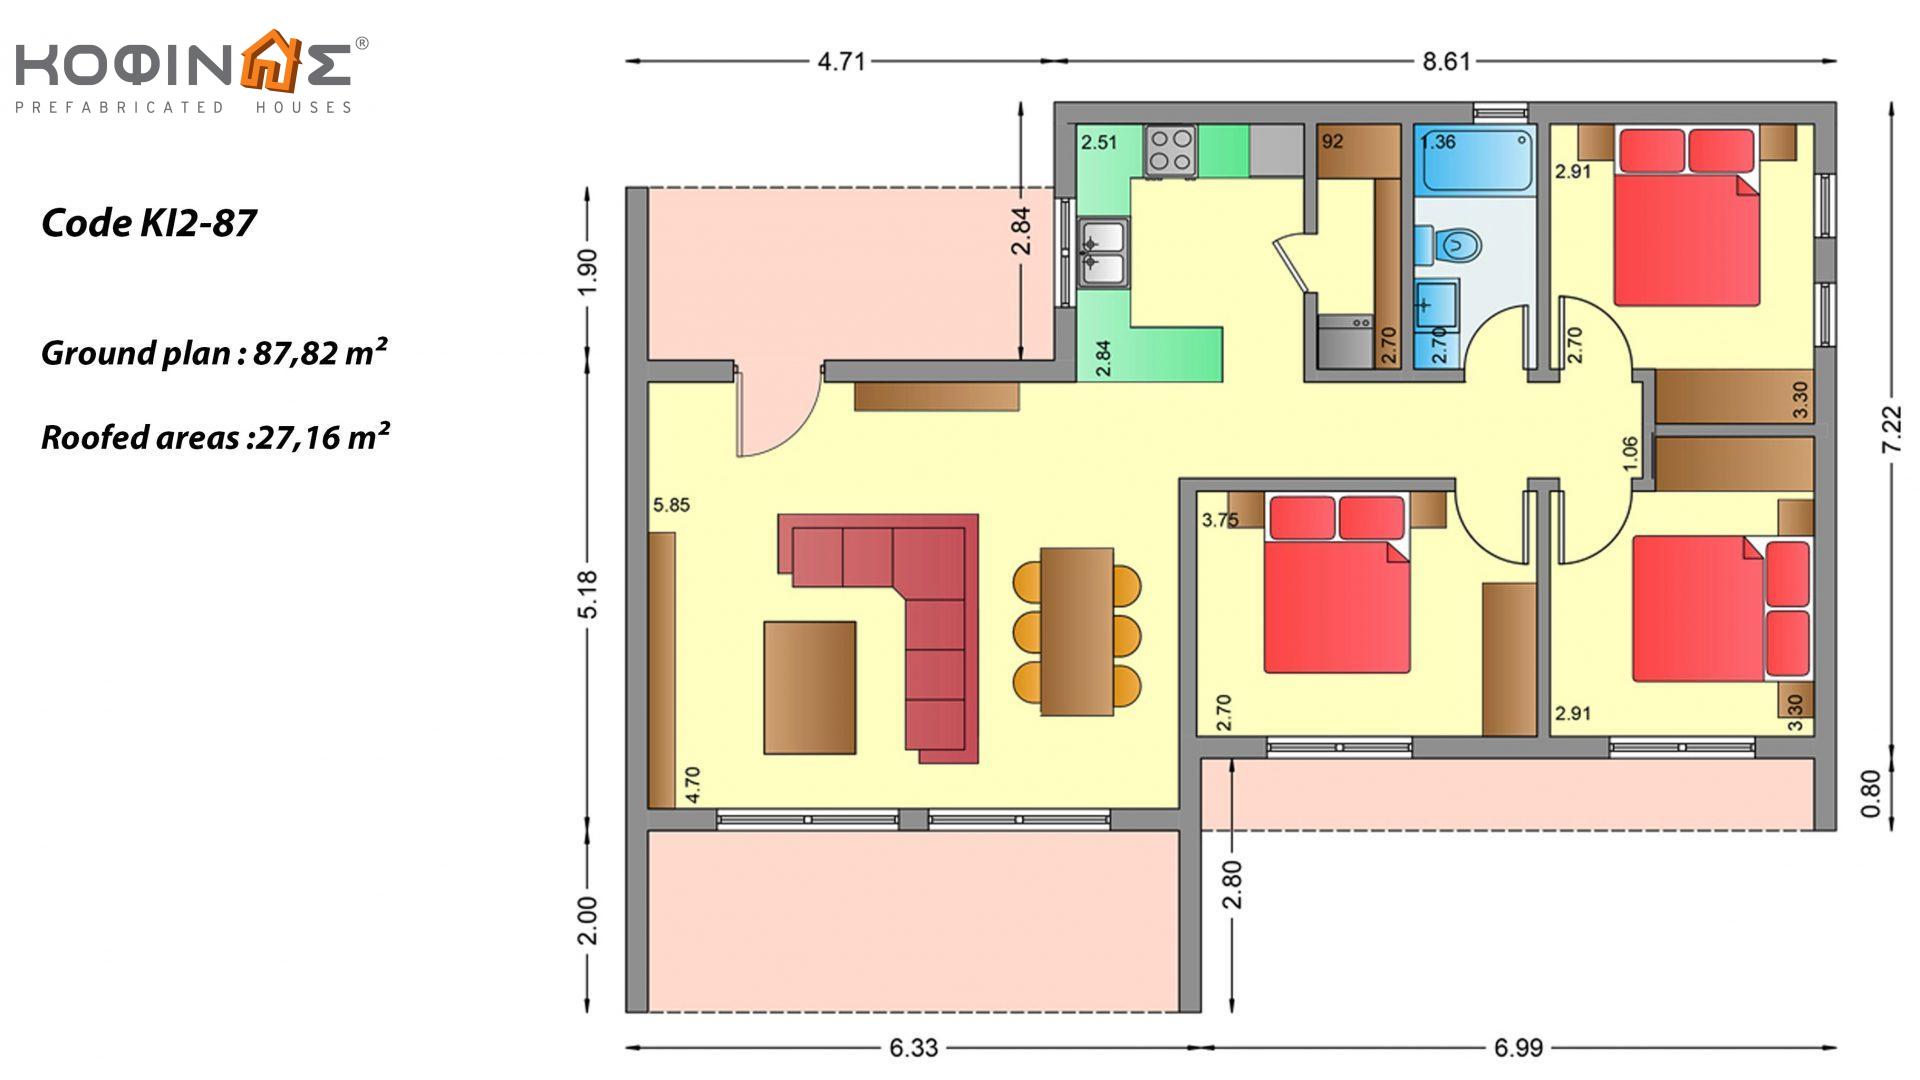 1-story house ΚI2-87, total surface of 87.82 m², covered roofed areas 27.16 m²